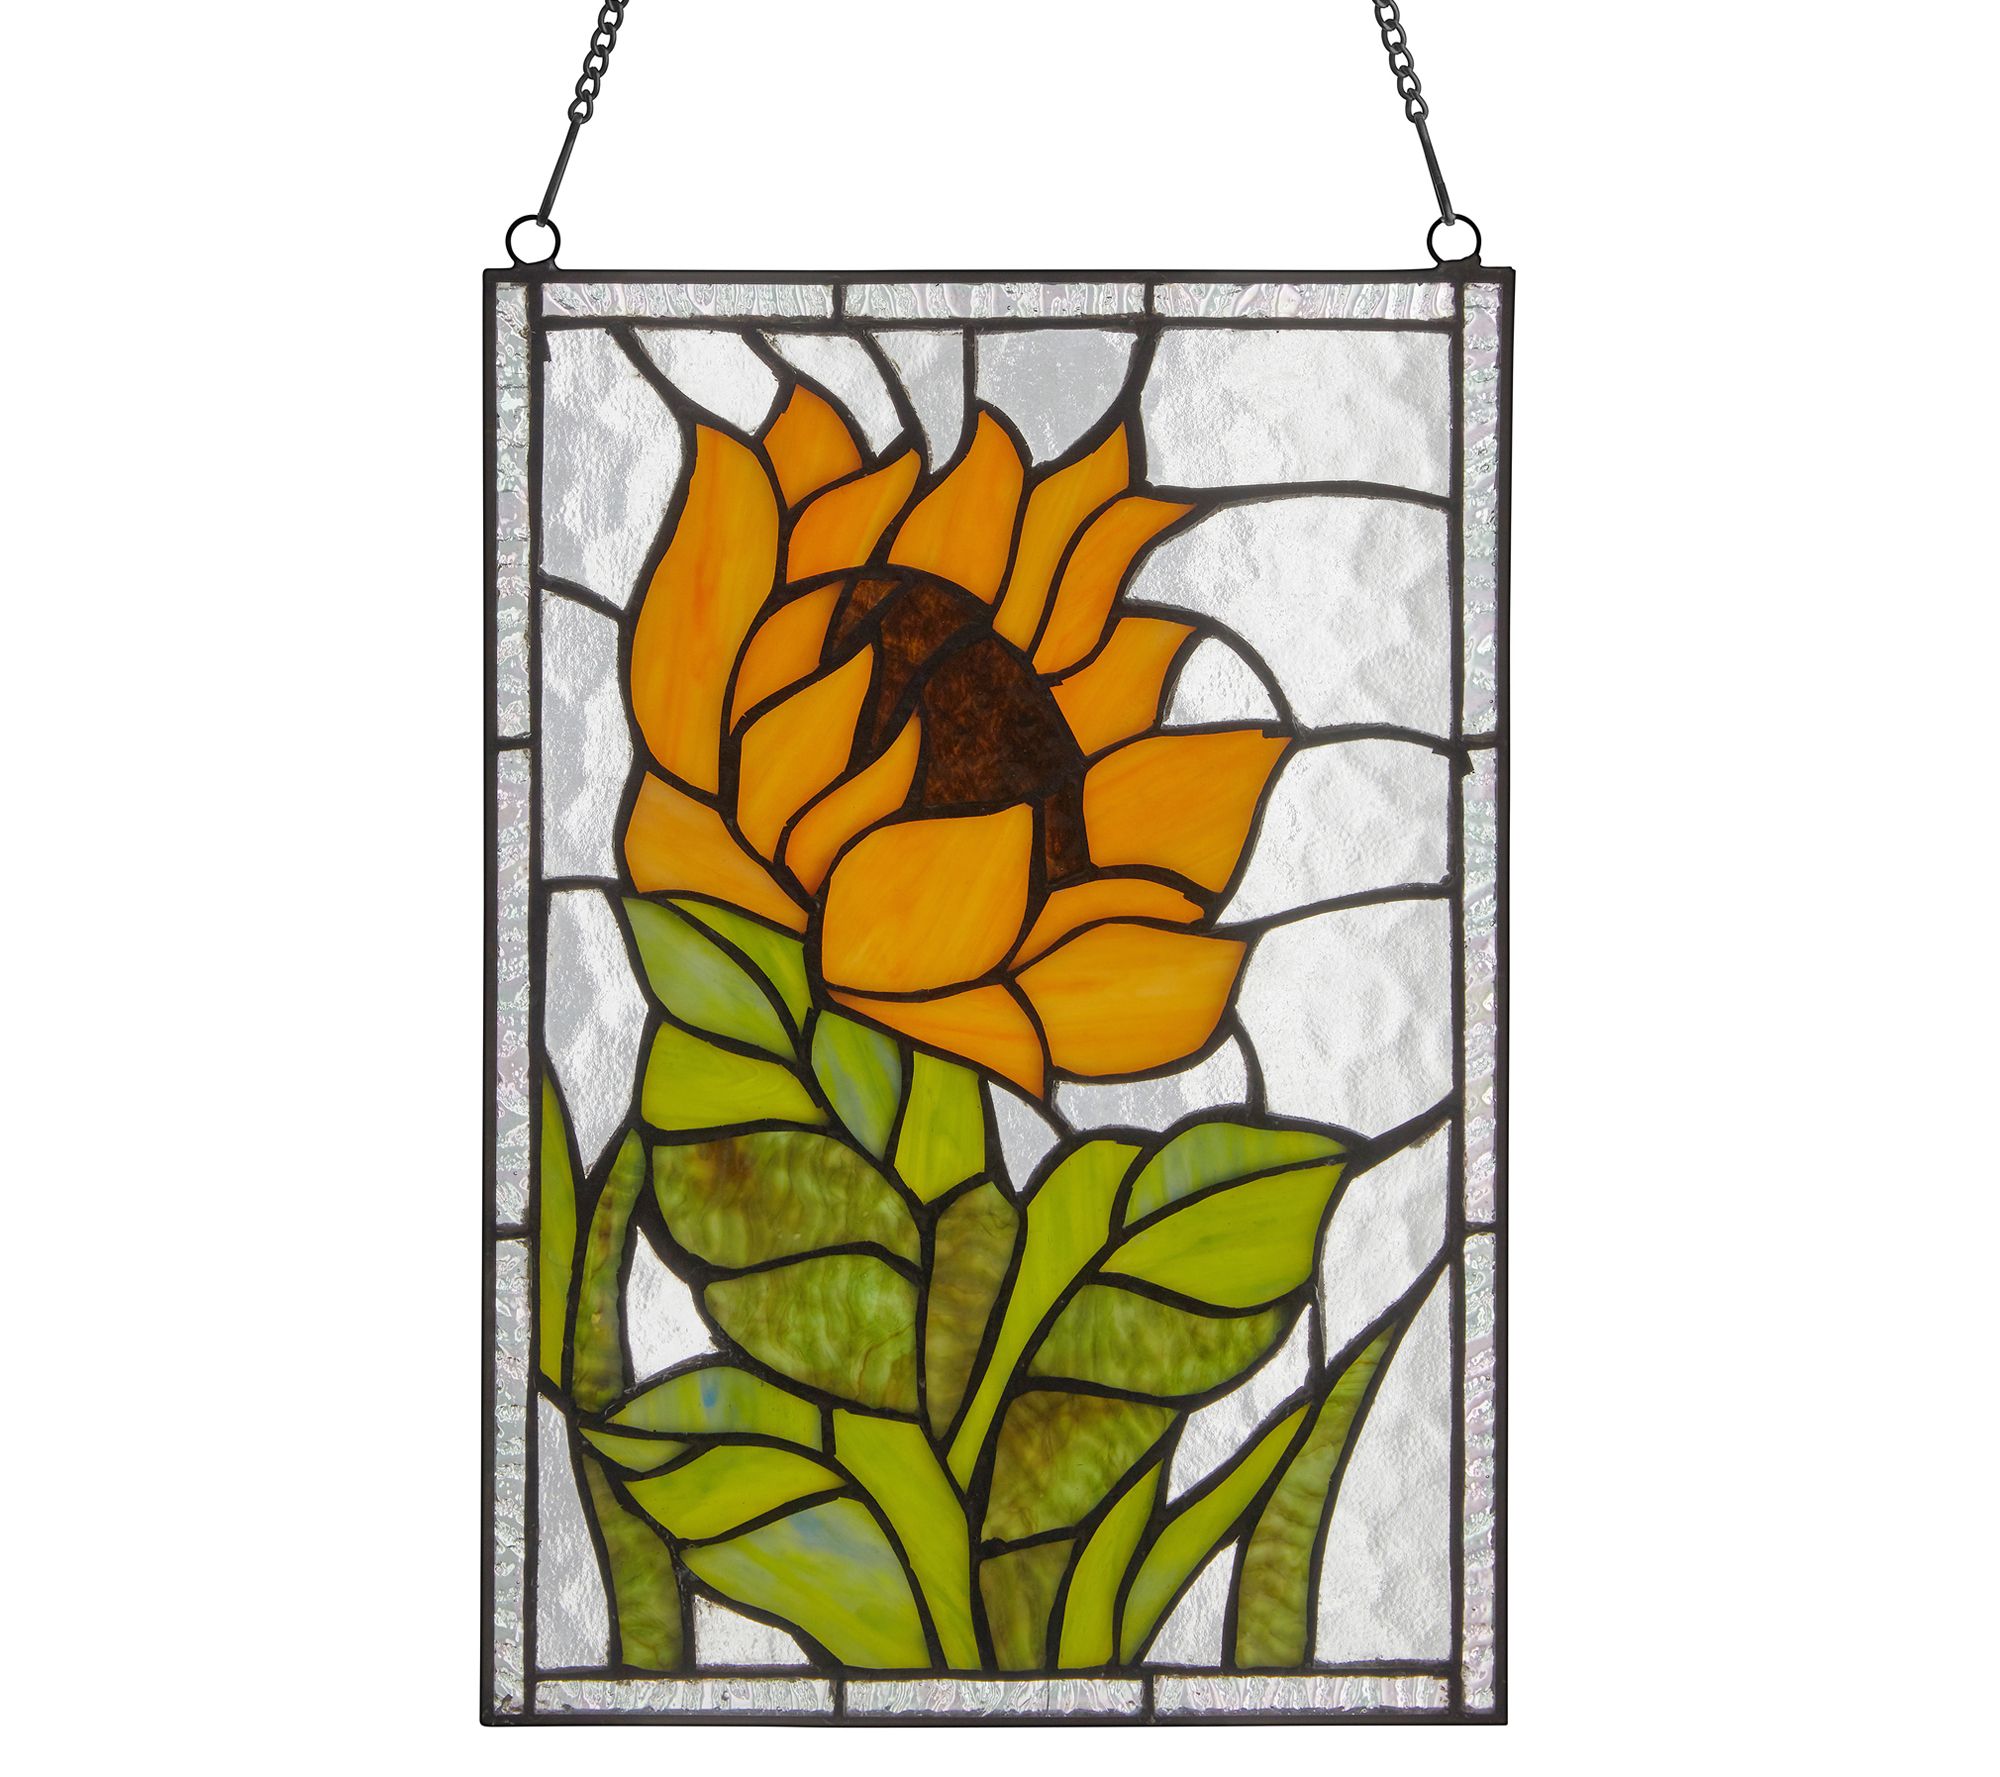 Sunflower with Leaves Stained Glass 12x12 Patterned Vinyl Sheet